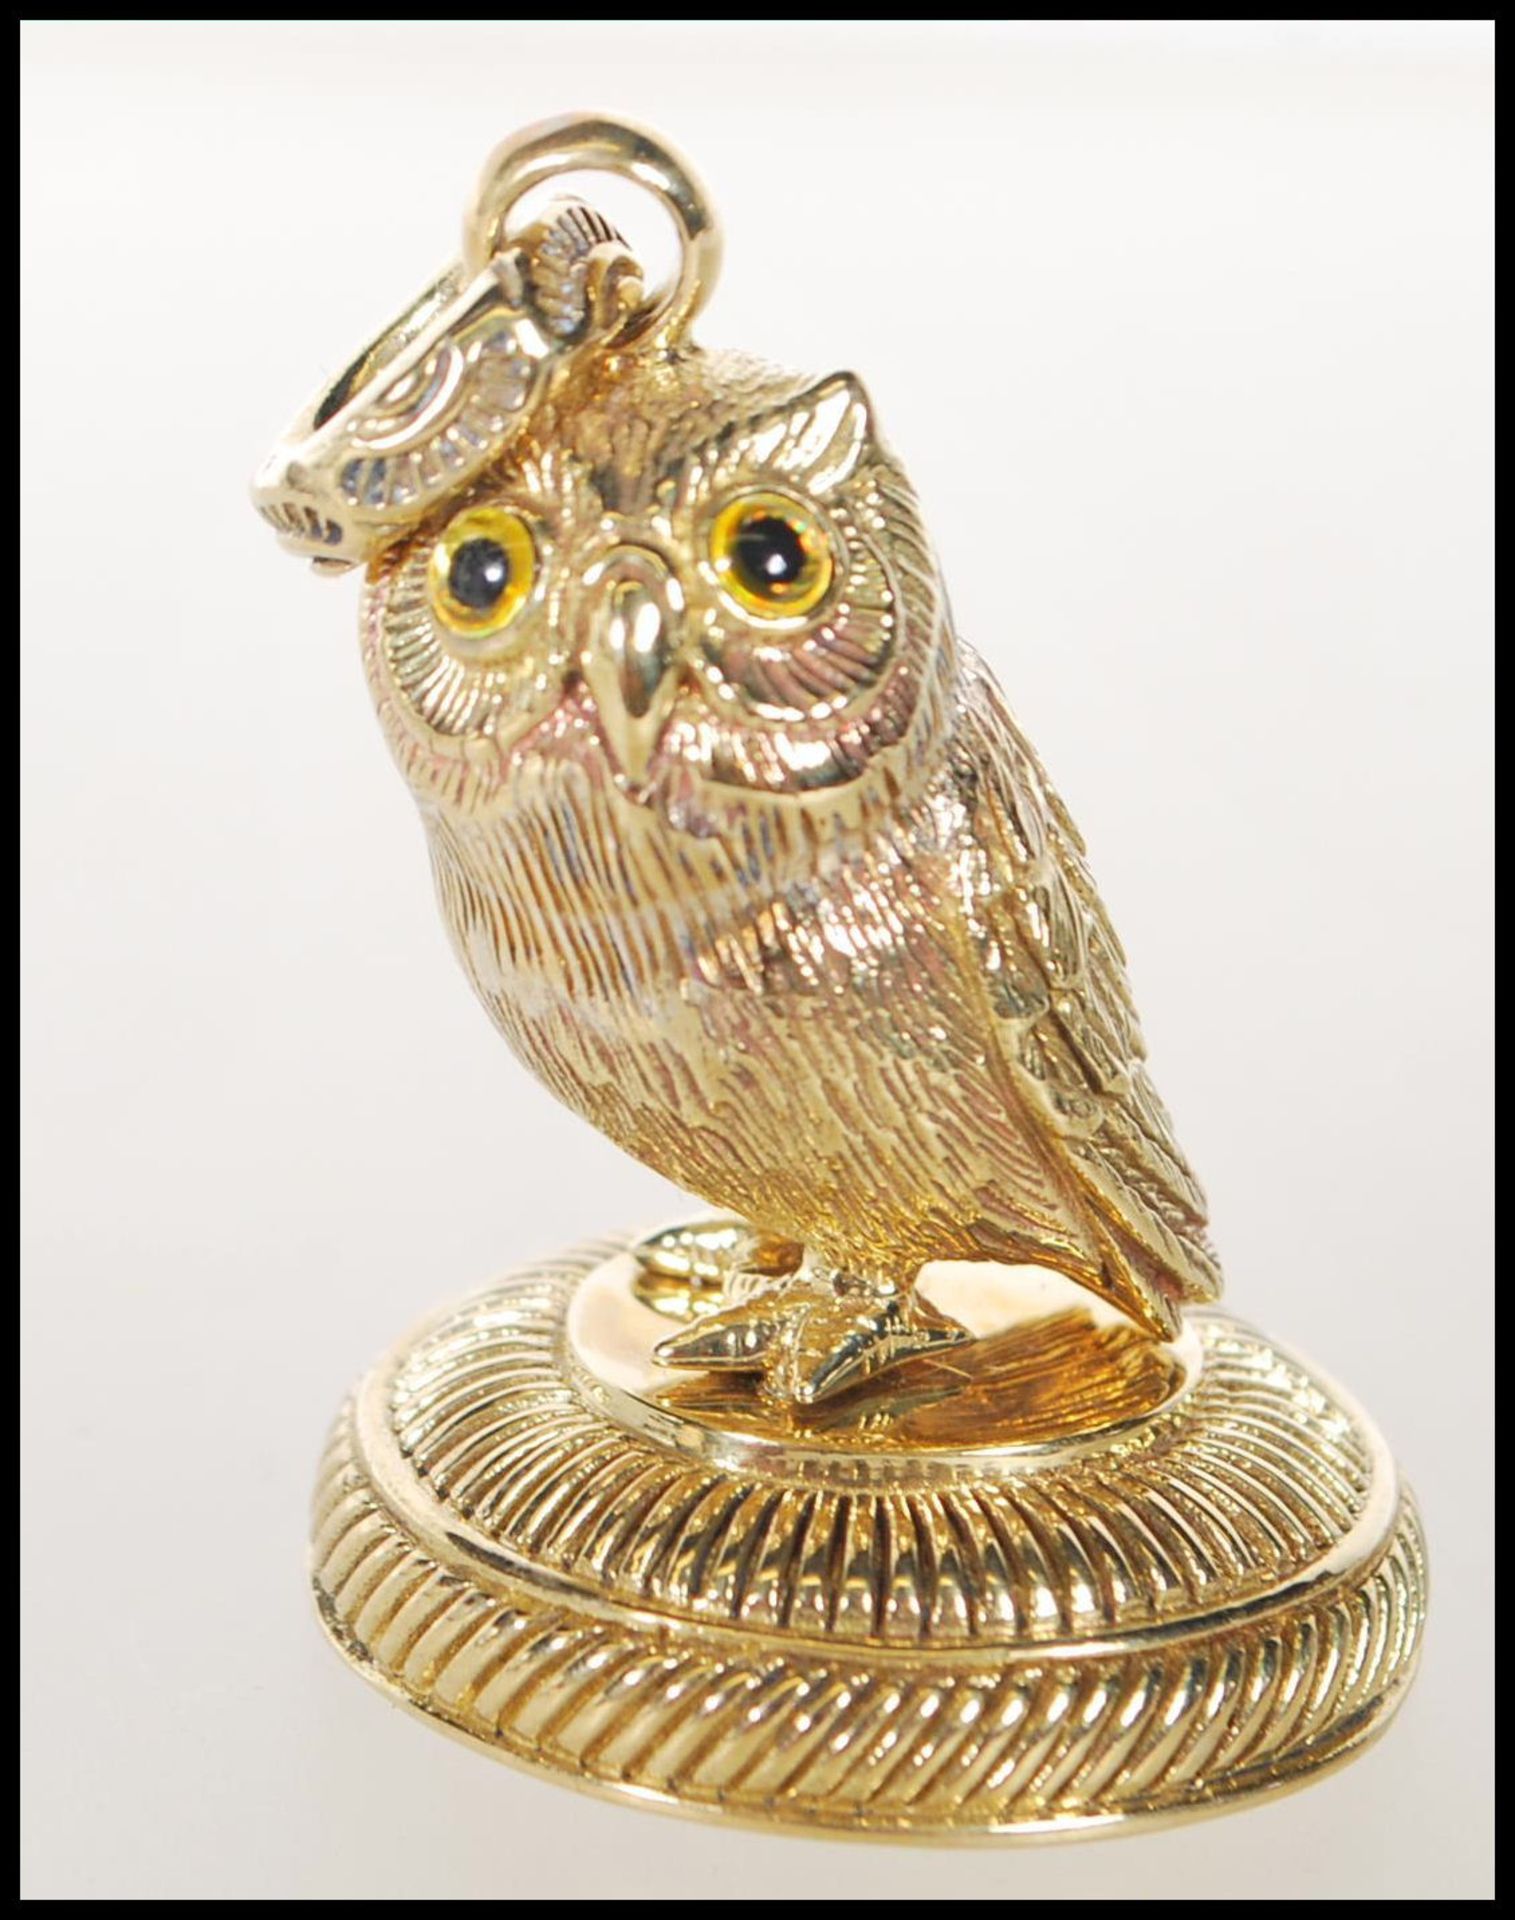 A contemporary gold plate seal in the form of an owl. Measures 4cm tall by 2.5cm diameter.